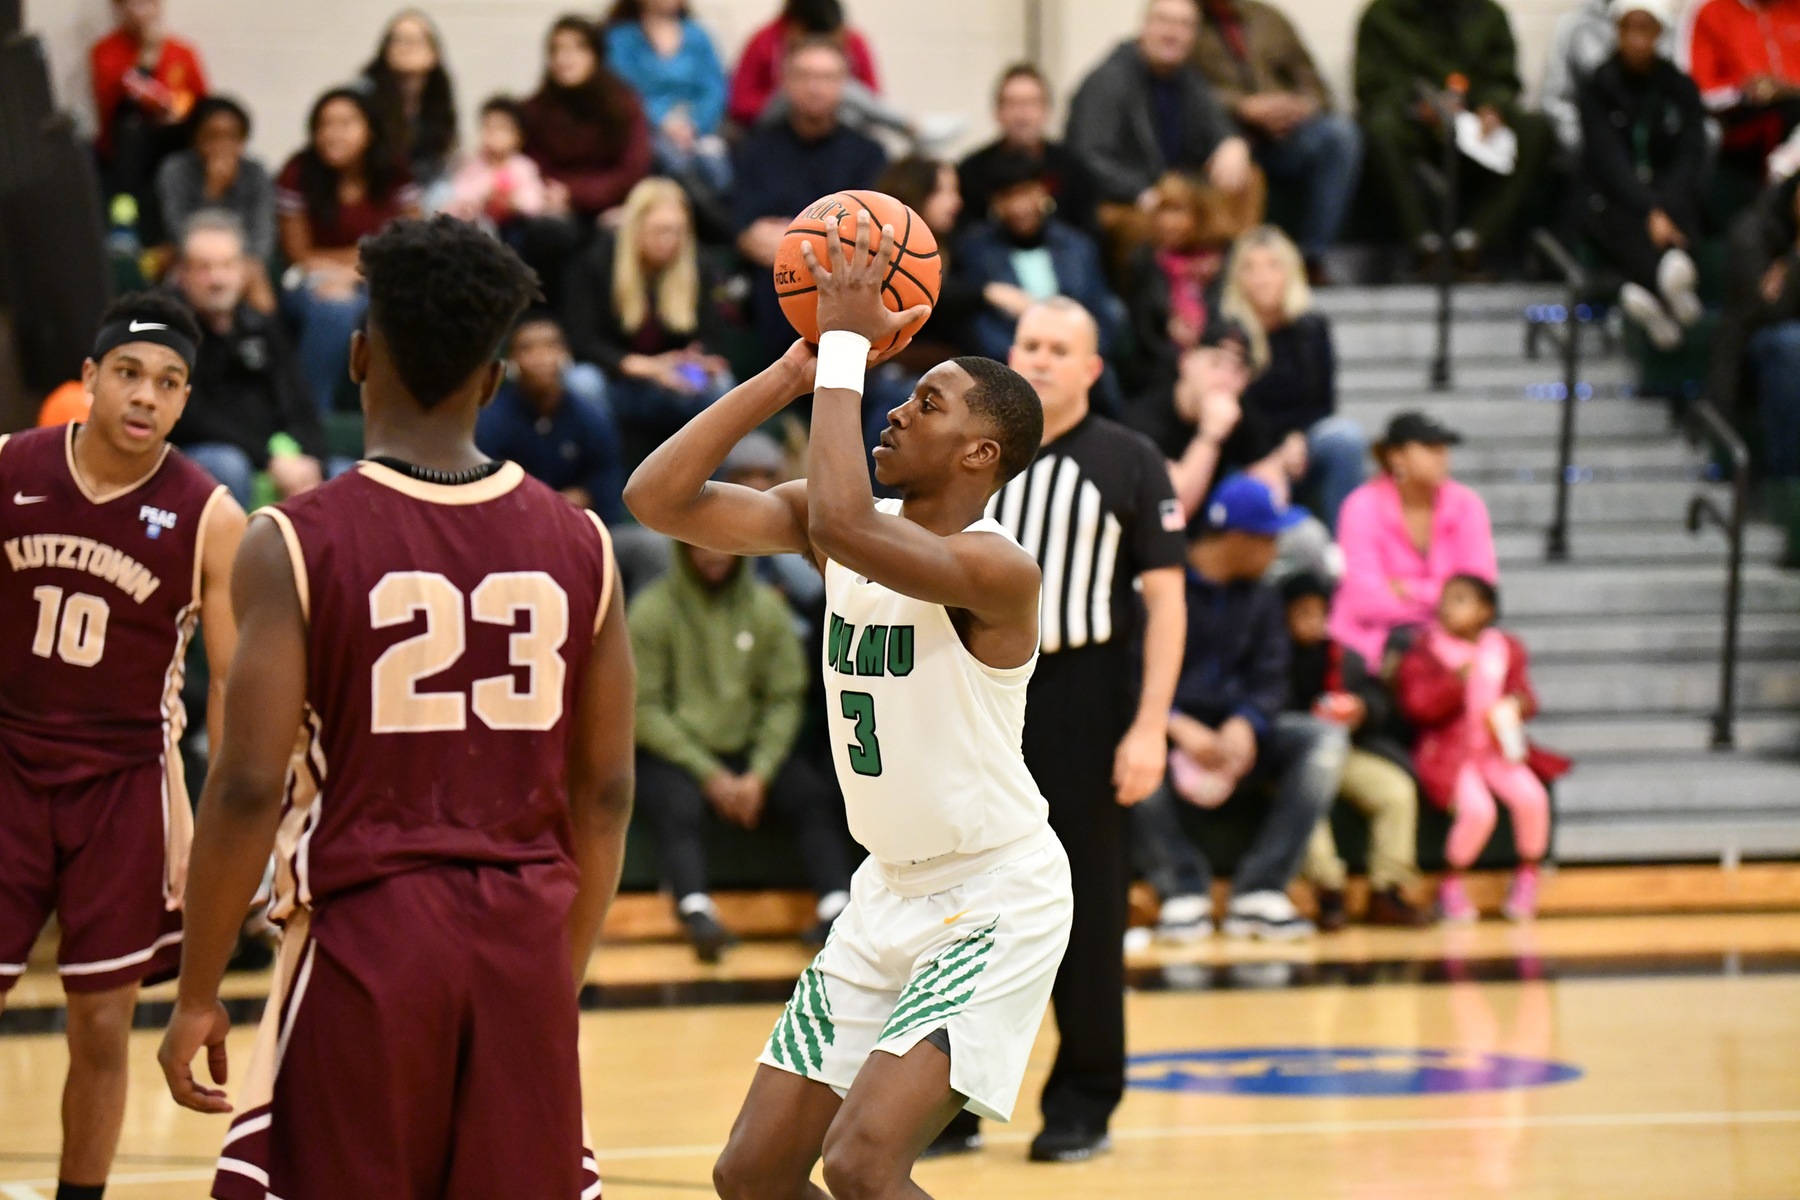 File photo of Taalib Holloman who led the team with 17 points at Goldey-Beacom. Copyright 2019; Wilmington University. All rights reserved. Photo by Gavin Bethell. December 14, 2019 vs. Kutztown.